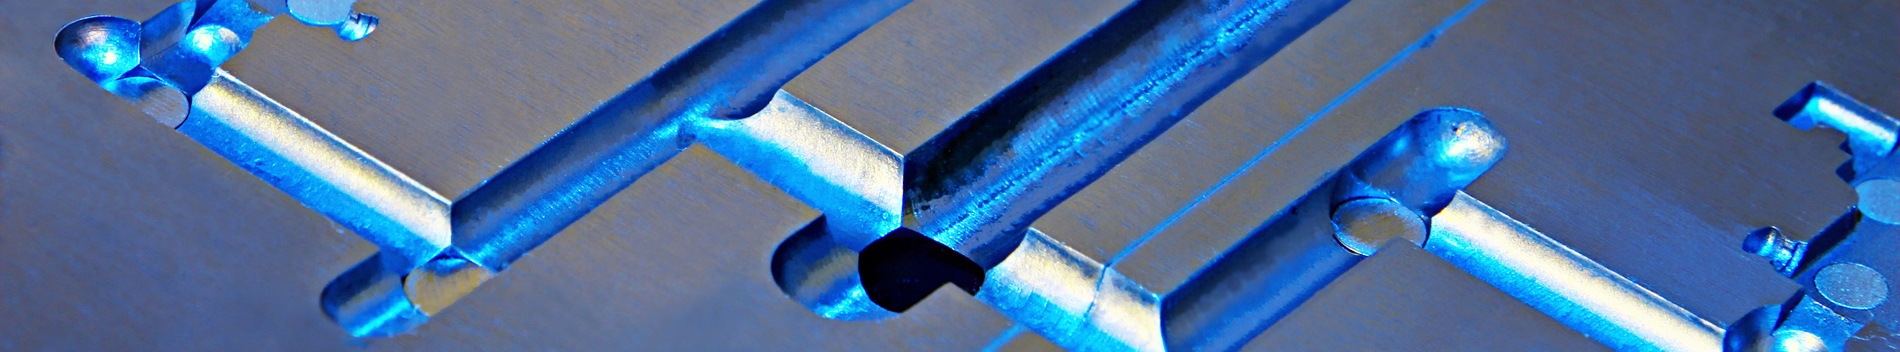 Nickel Alloys, Titanium and Stainless Steels in Costruction